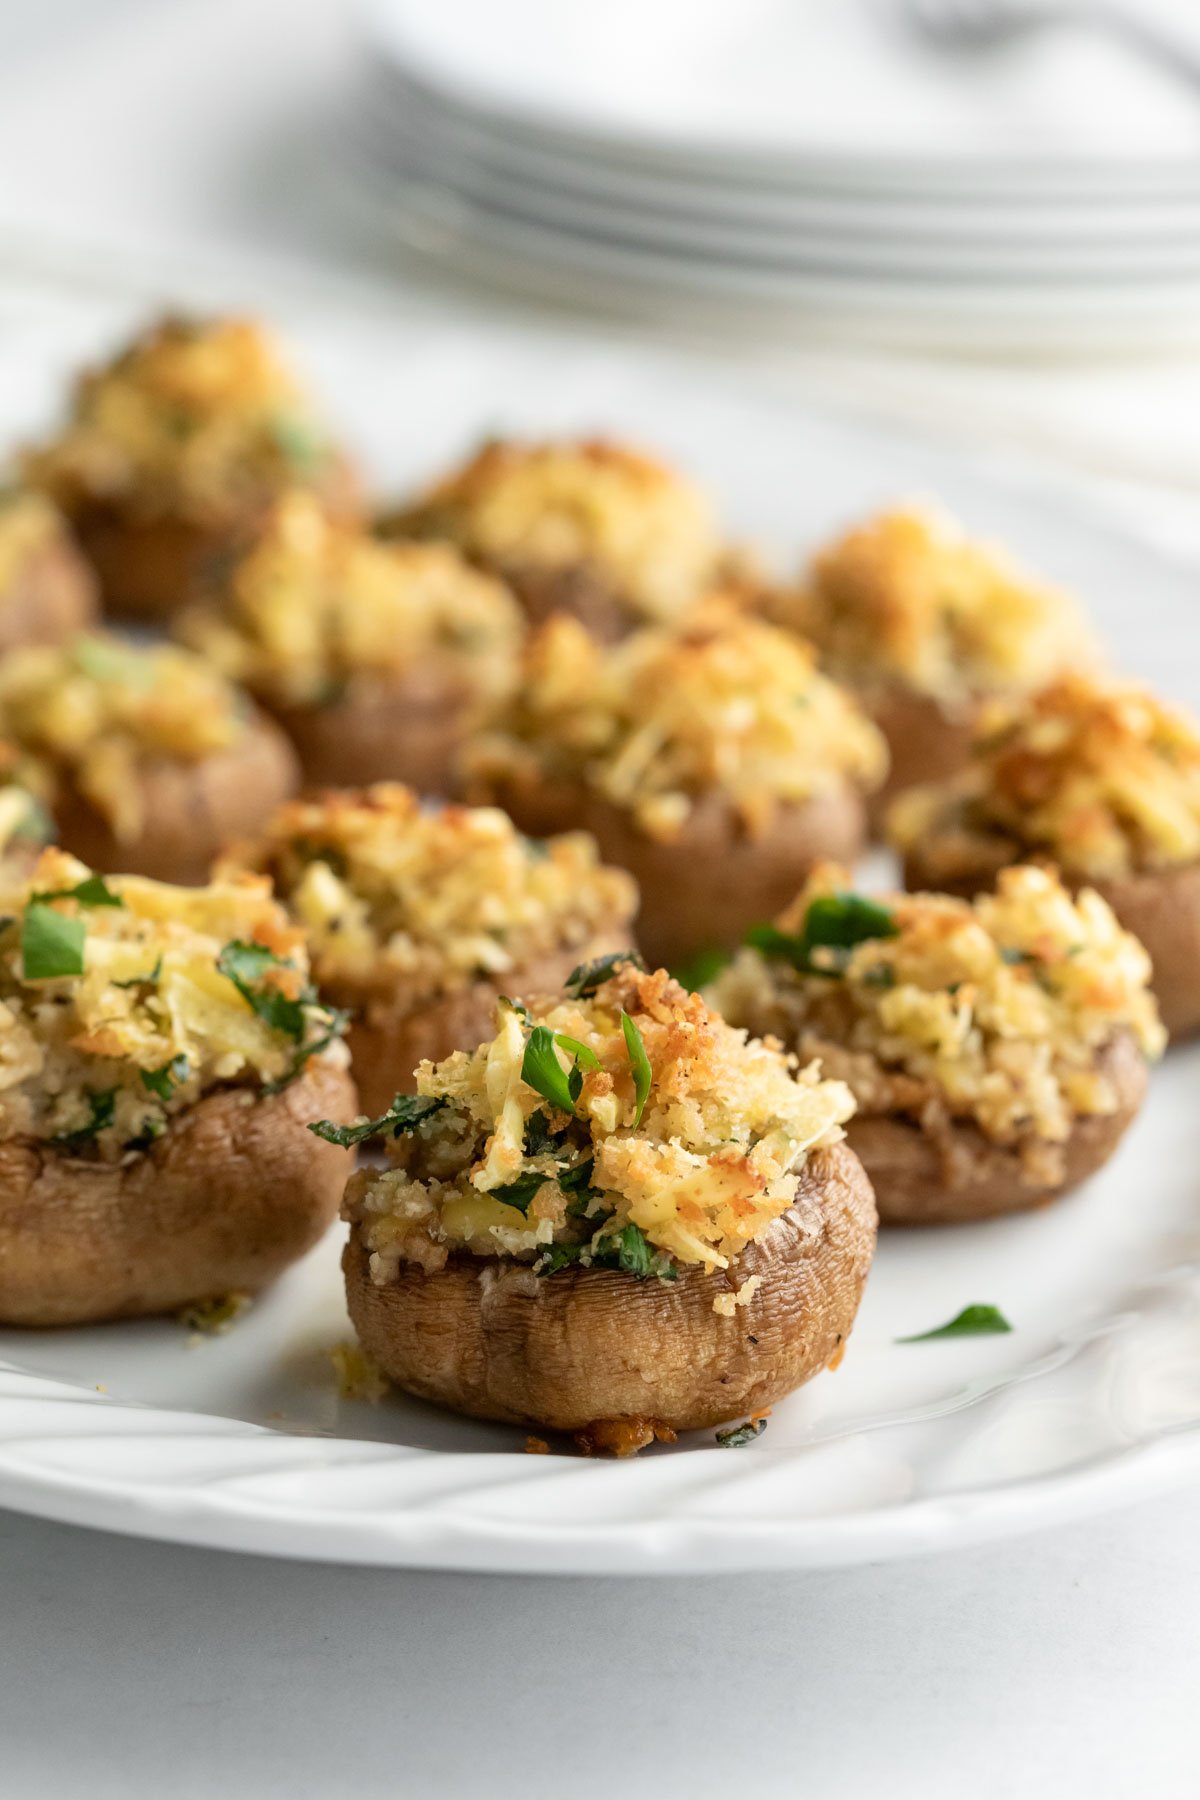 A brightly lit photo of vegan stuffed mushrooms on a white plate.